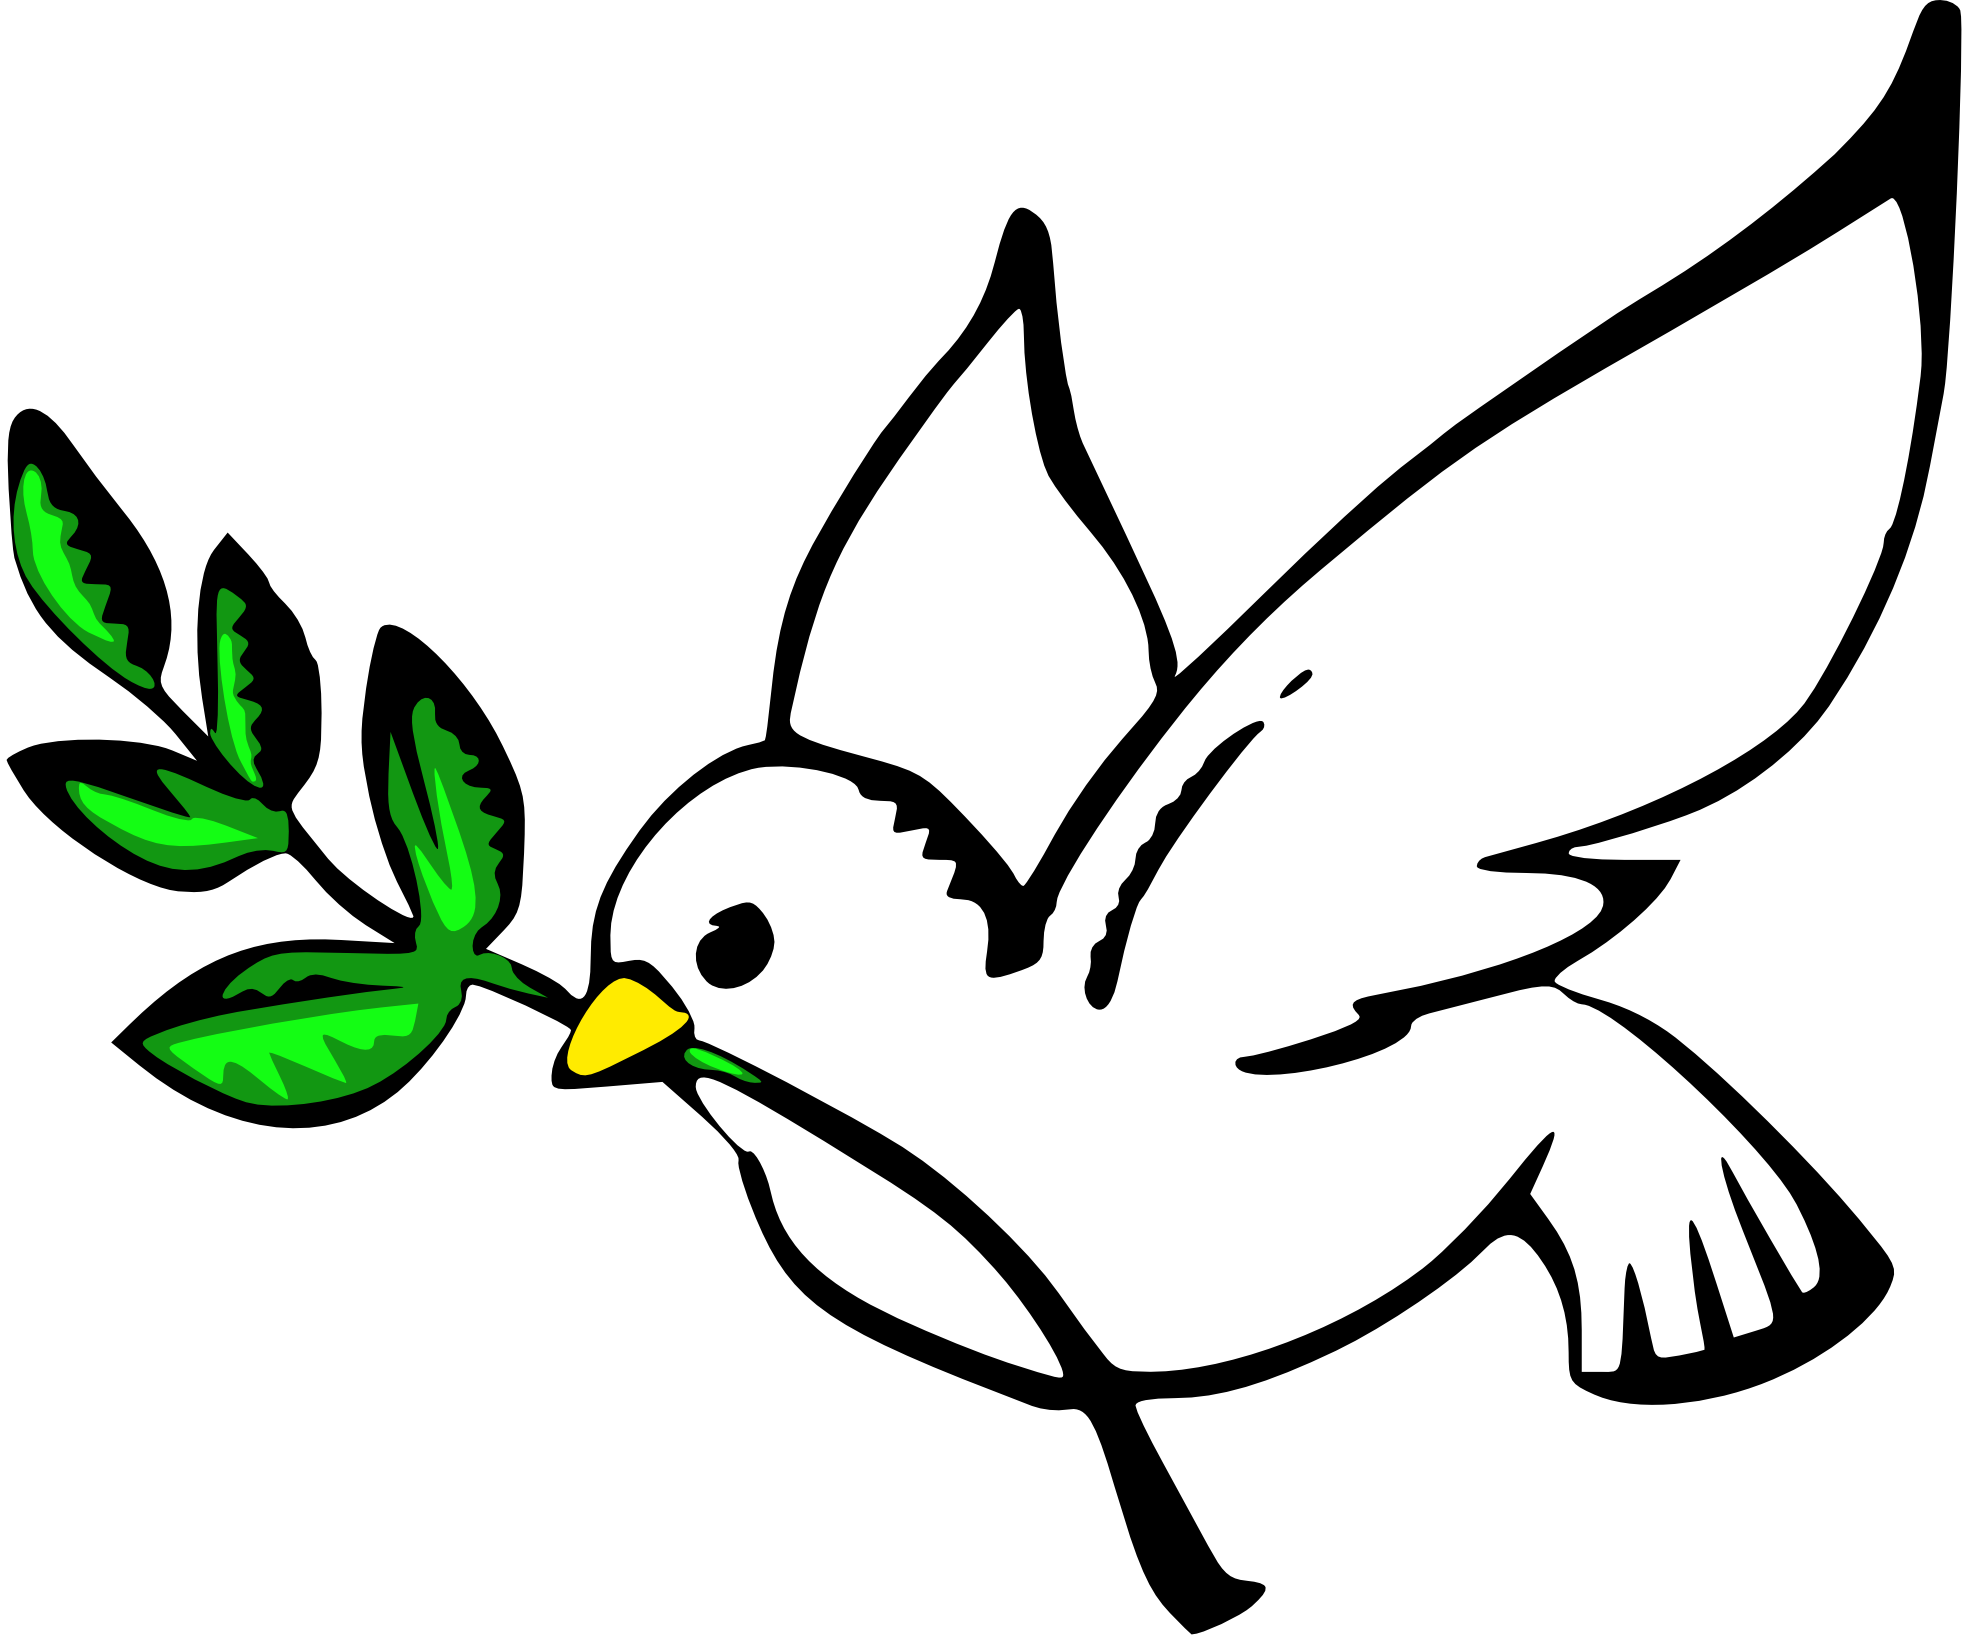 Doves clipart free